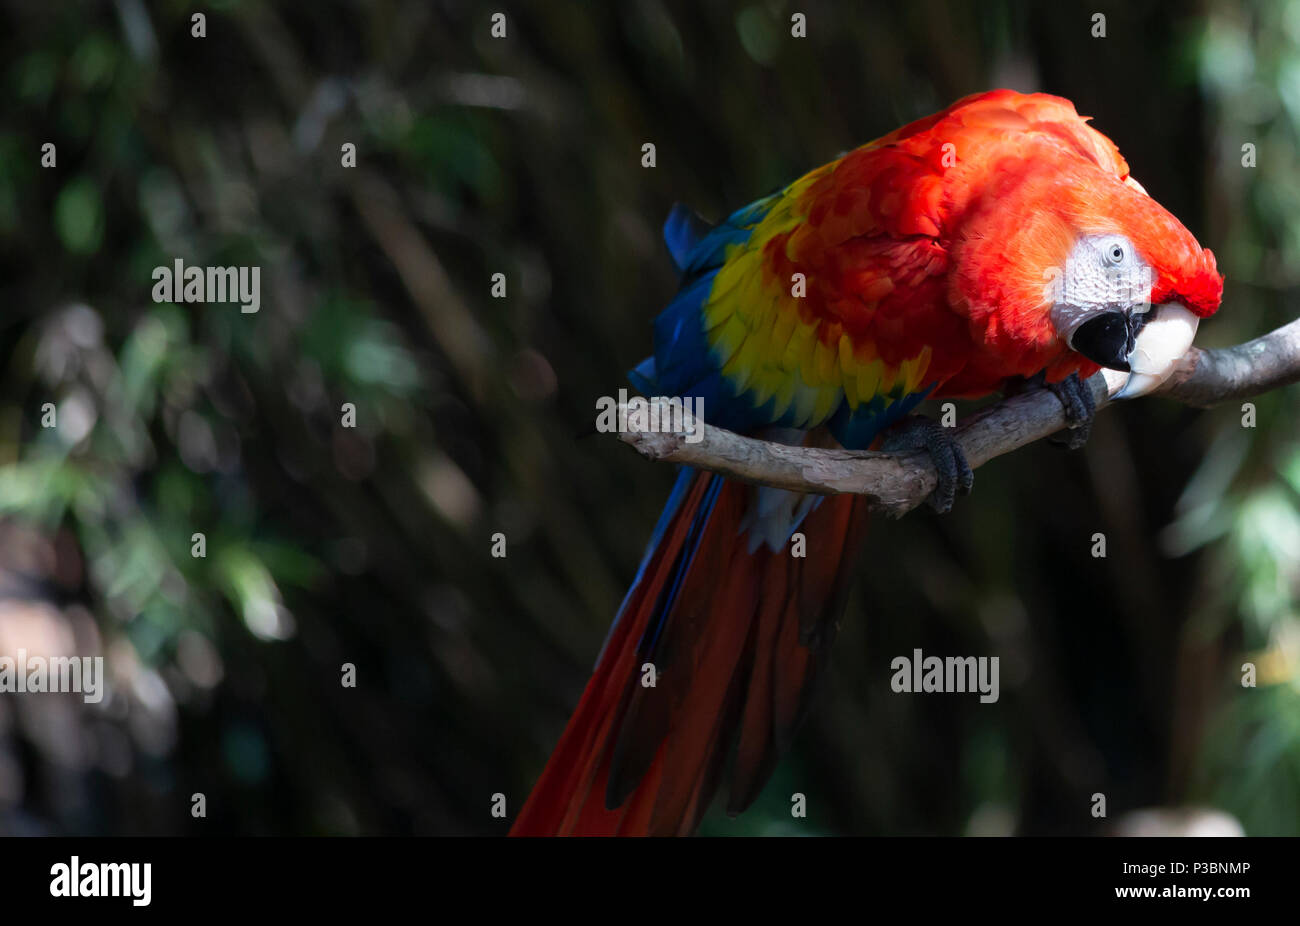 Scarlet macaw bird bent forward, preparing to squawk on a branch perch Stock Photo